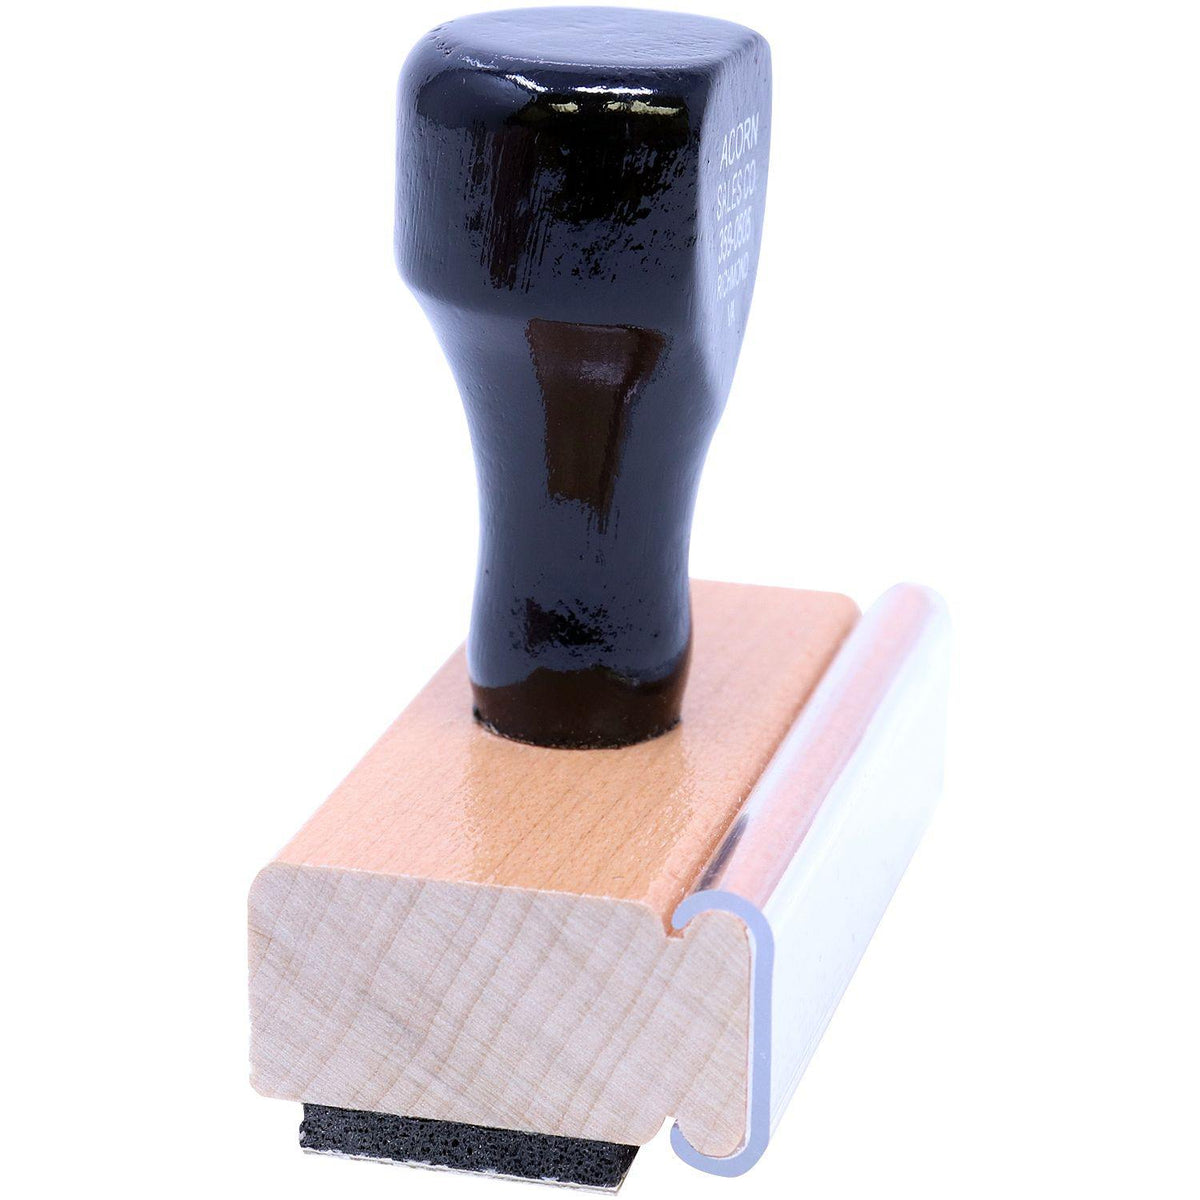 Side View of Large Cancelado Rubber Stamp at an Angle